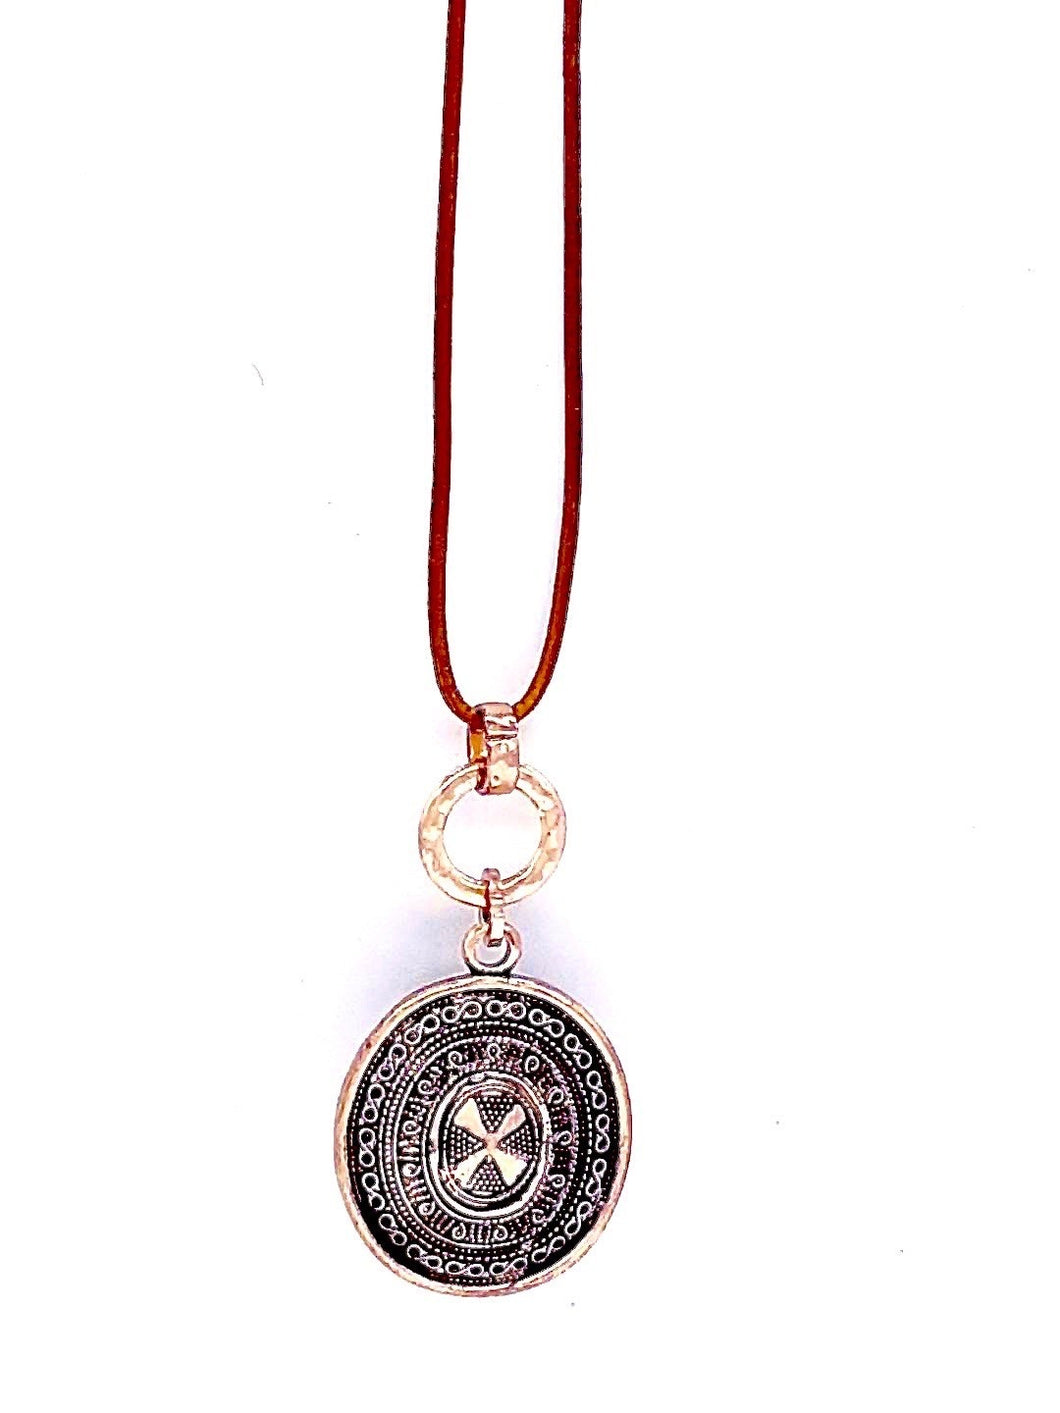 LONG COPPER / ROSE GOLD PENDANT WITH LEATHER NECKLACE